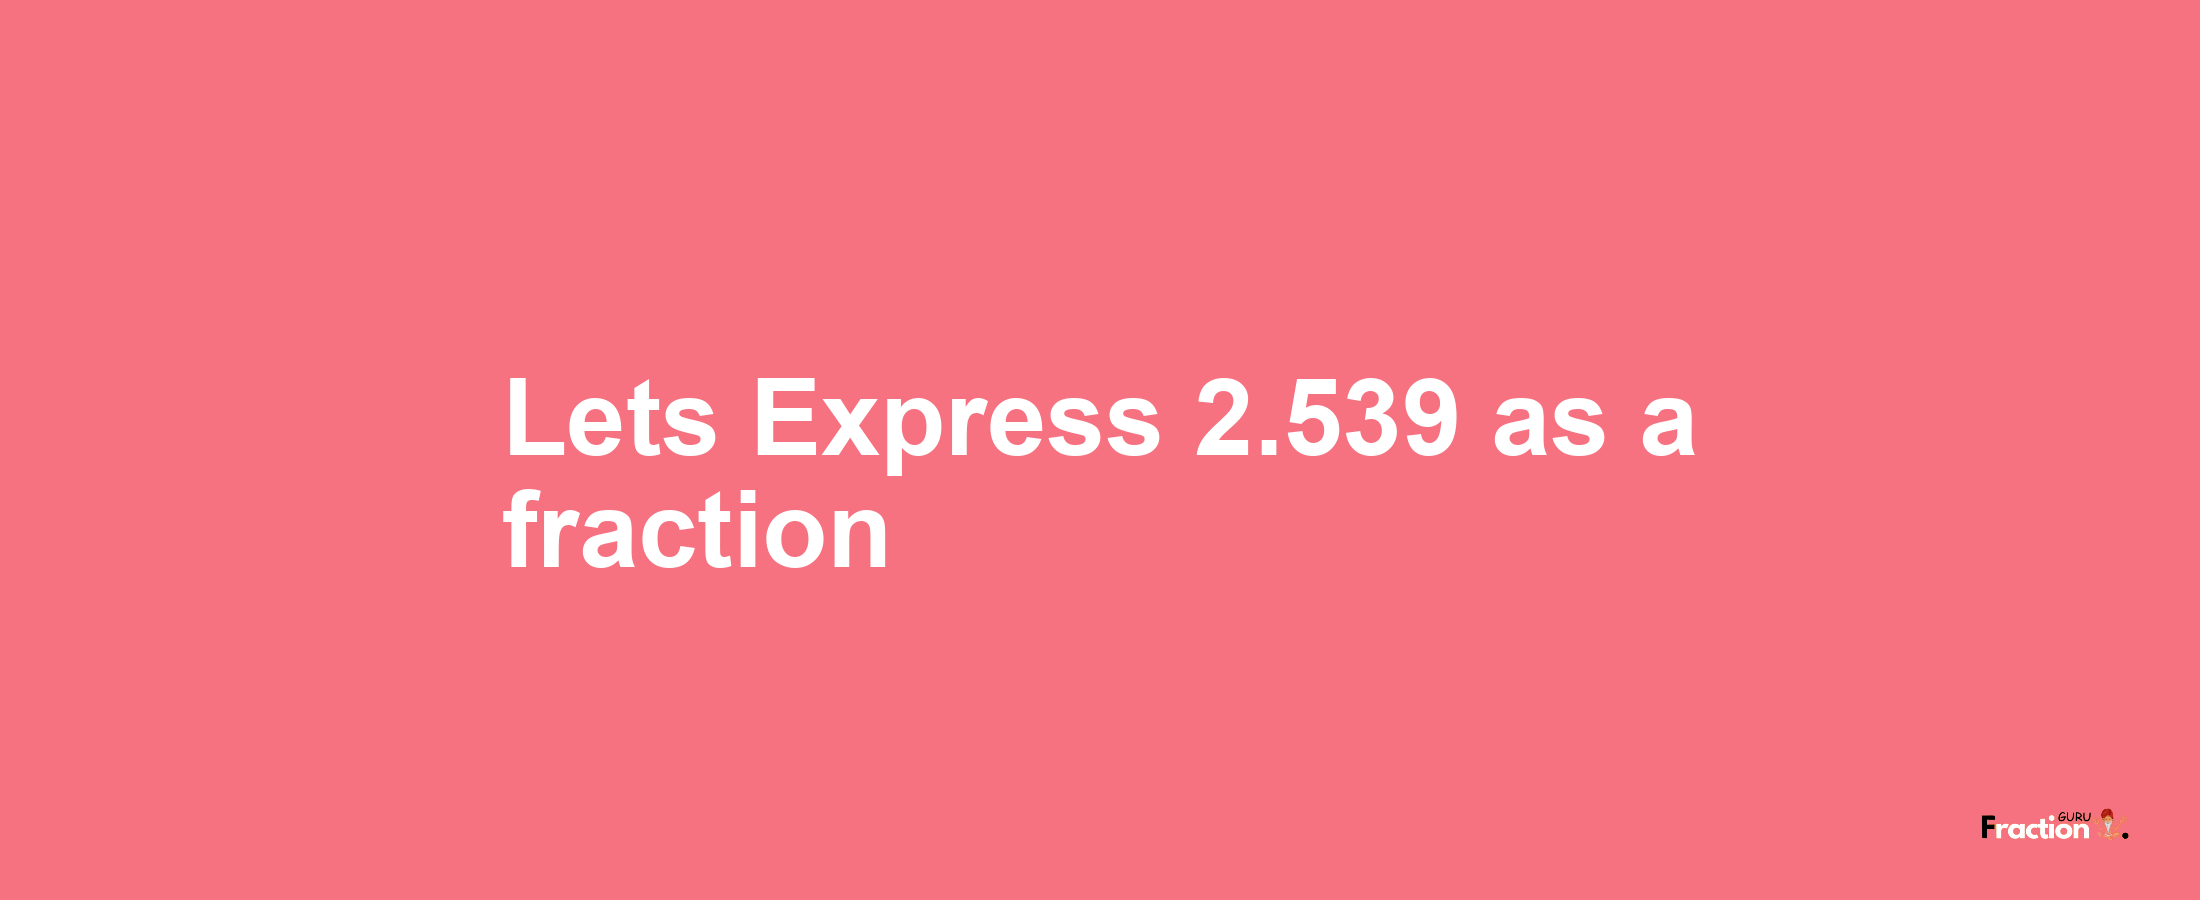 Lets Express 2.539 as afraction